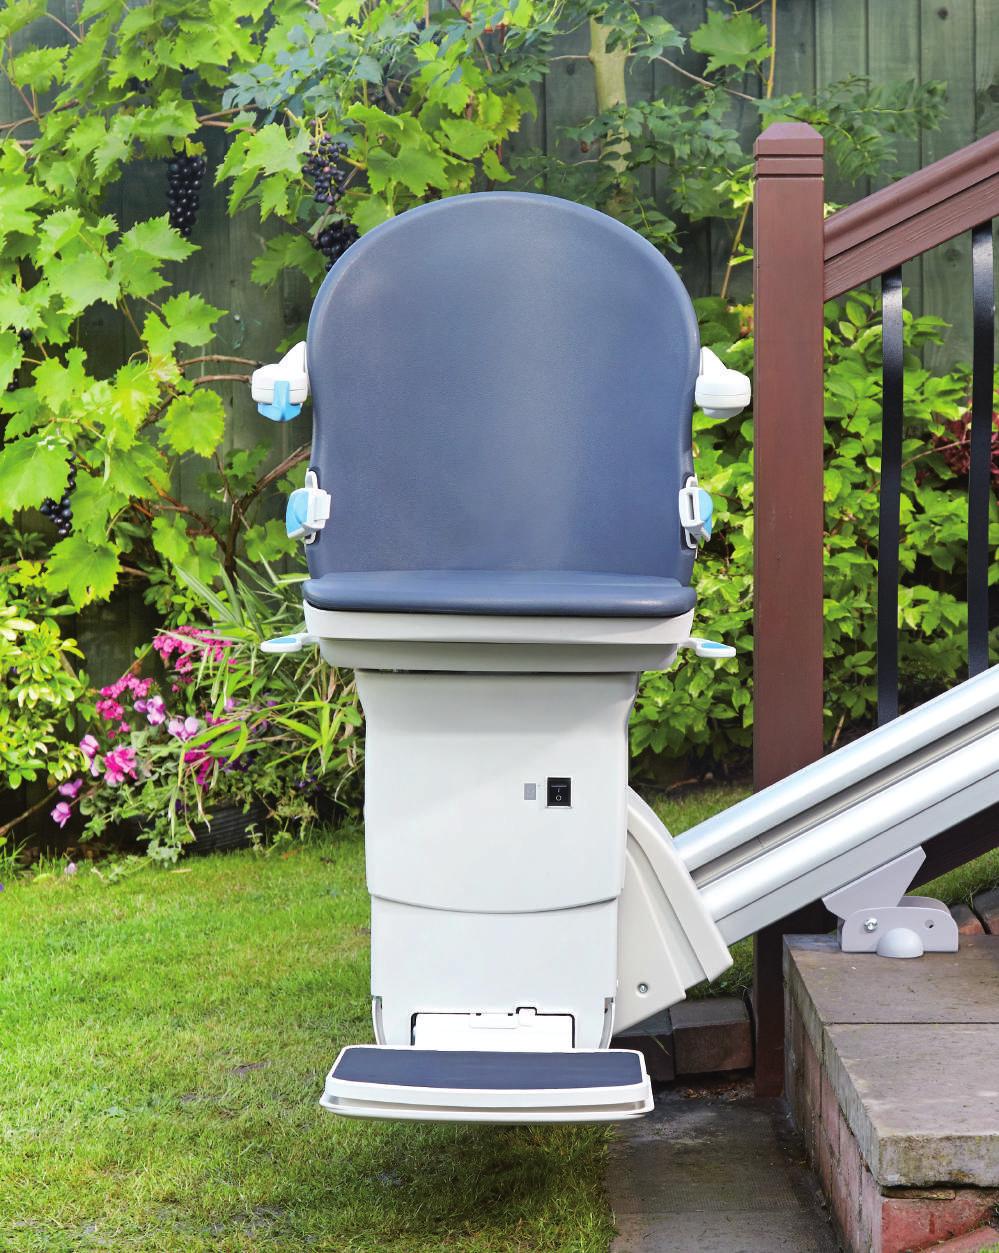 Outdoor 1000 Straight stairlift It isn t only stairs inside the home that cause problems for some people. Steps up to a porch or front door can be equally difficult to climb.